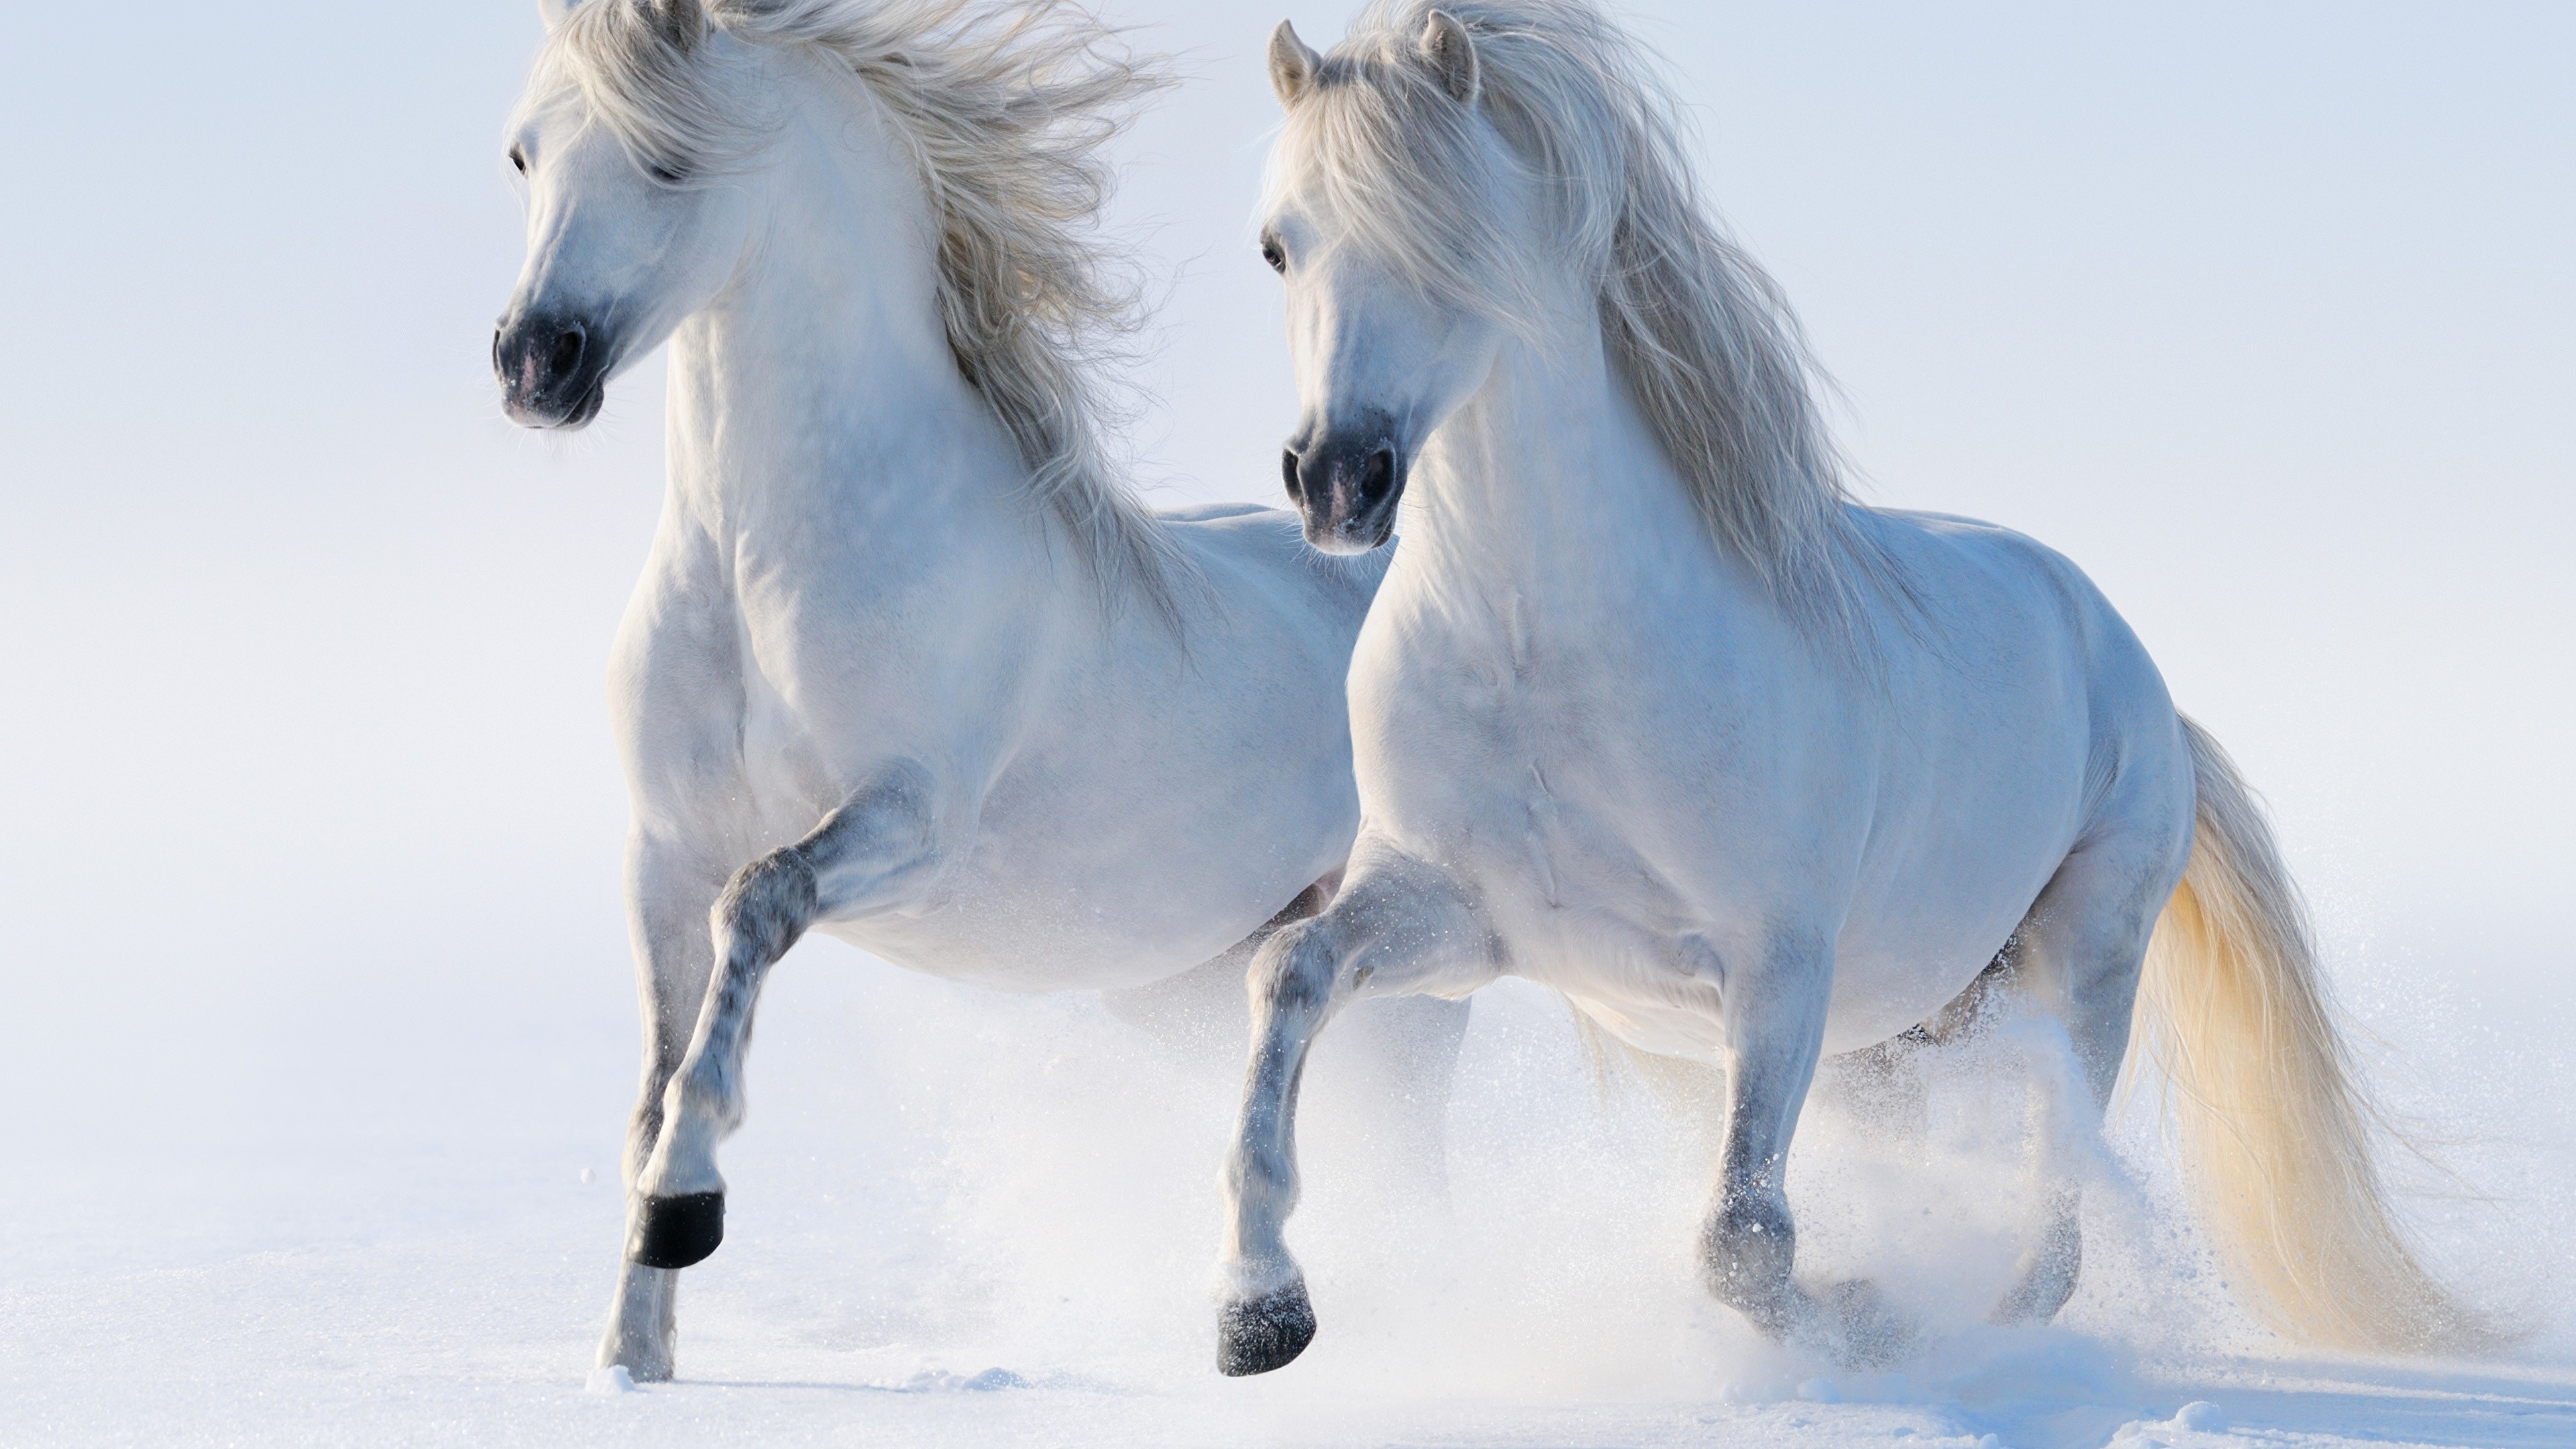 Horses in the snow, Cute animals, Winter photography, Scenic beauty, 3840x2160 4K Desktop